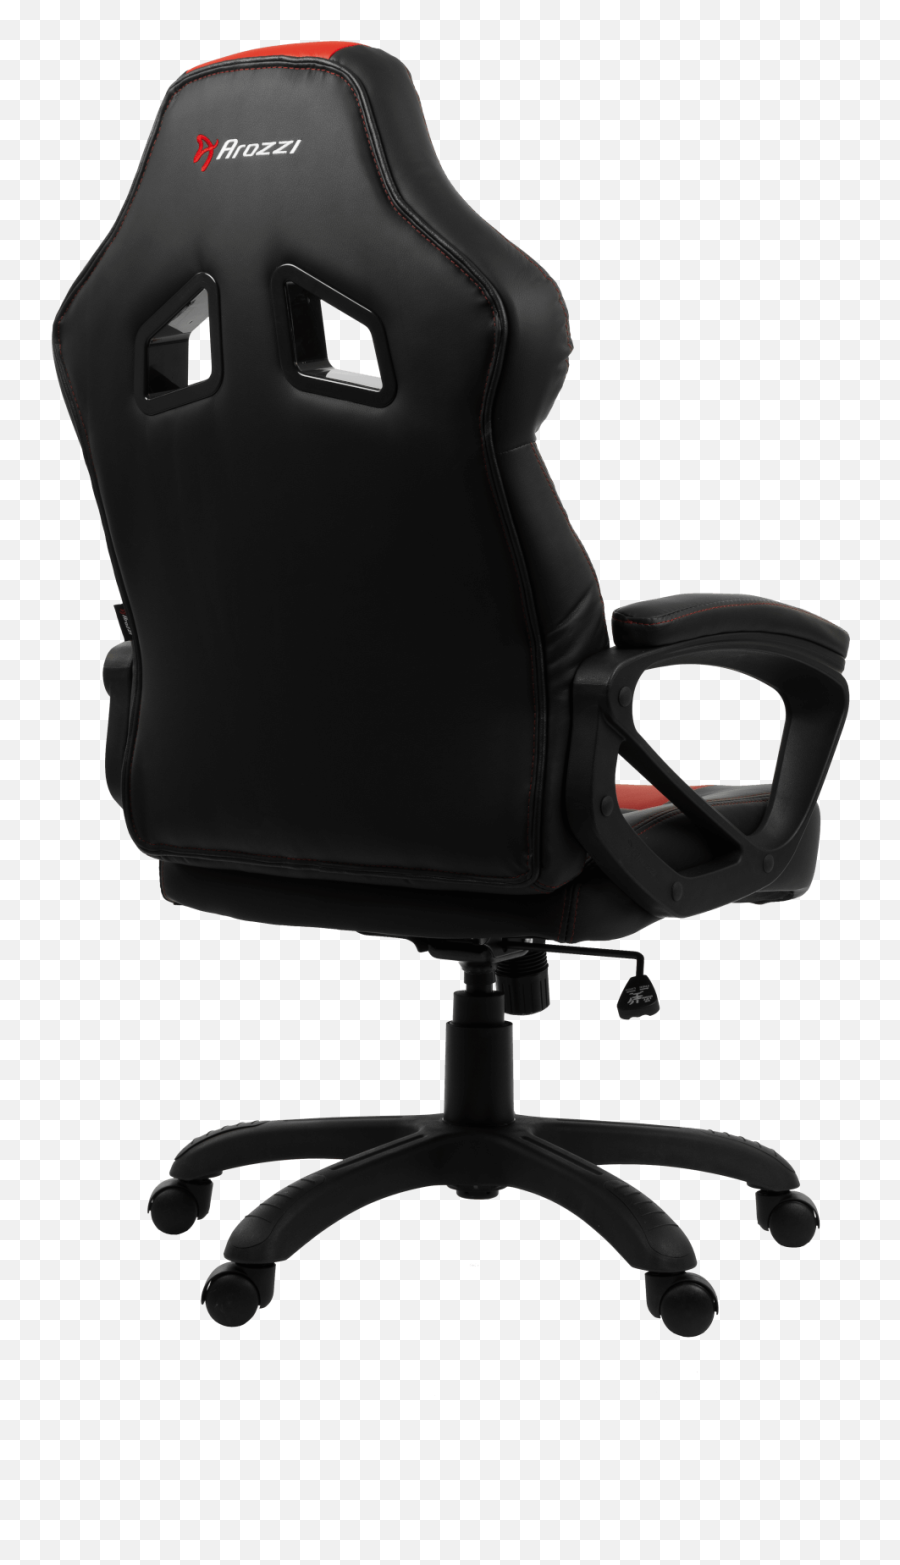 Monza - Arozzi Monza Gaming Chair Png,Gaming Chair Png